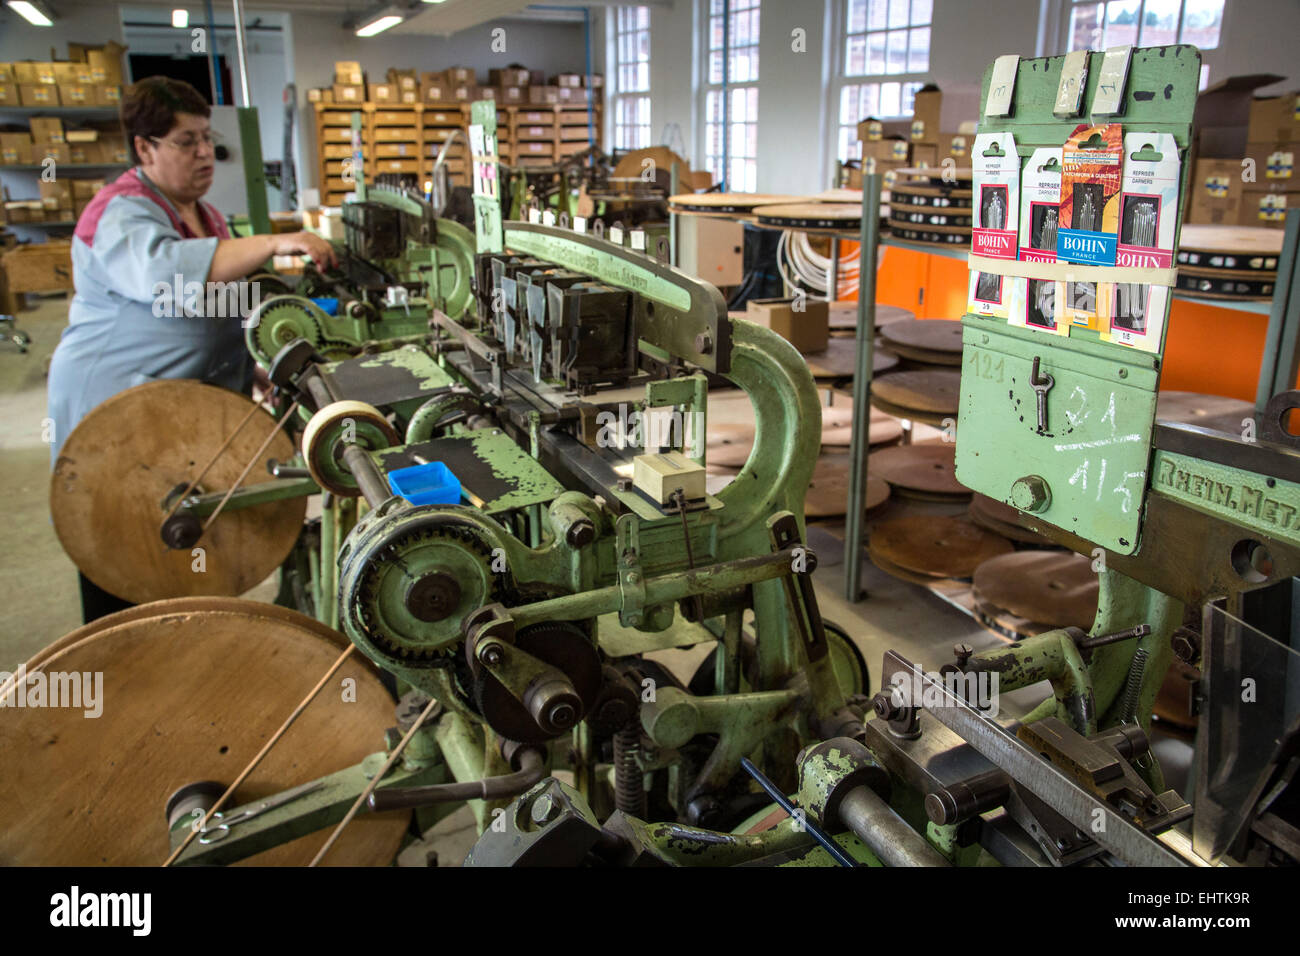 MANUFACTURE BOHIN, LIVING MUSEUM OF THE NEEDLE AND PIN, SAINT-SULPICE-SUR-RISLE, ORNE (61), FRANCE Stock Photo